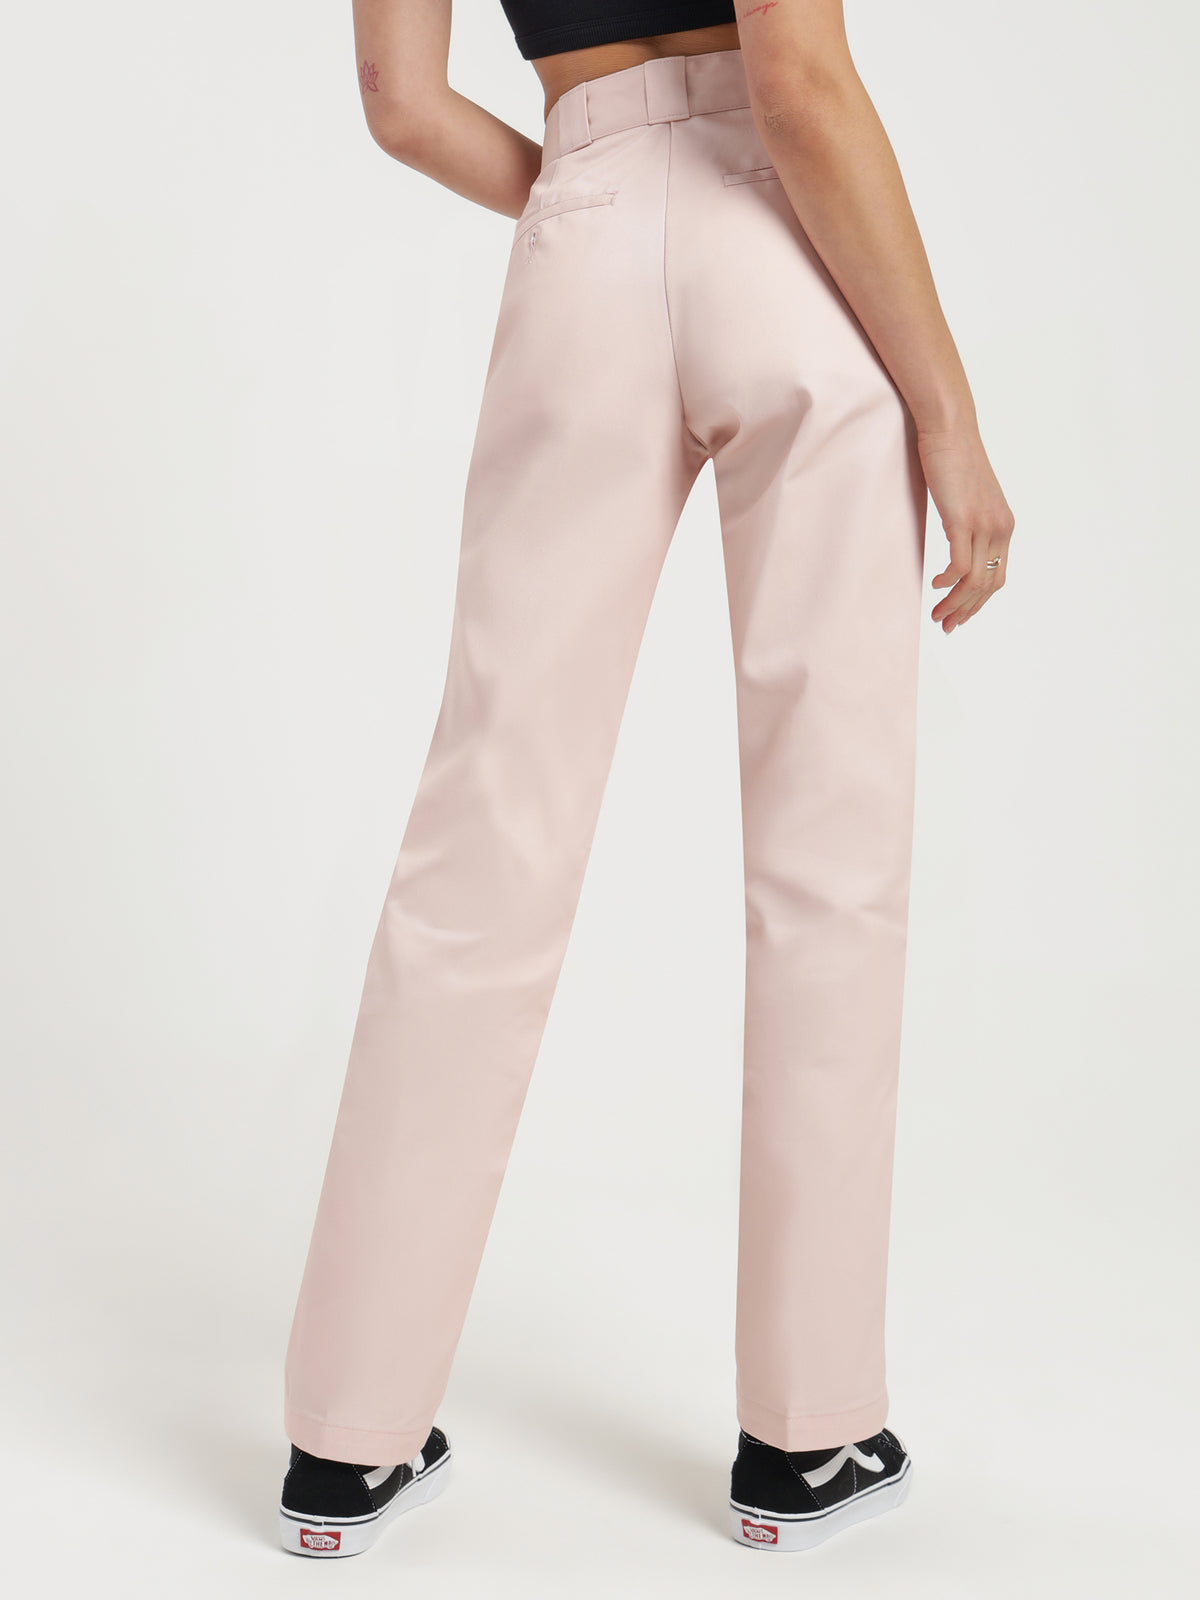 875 Tapered Fit Pants in Pink